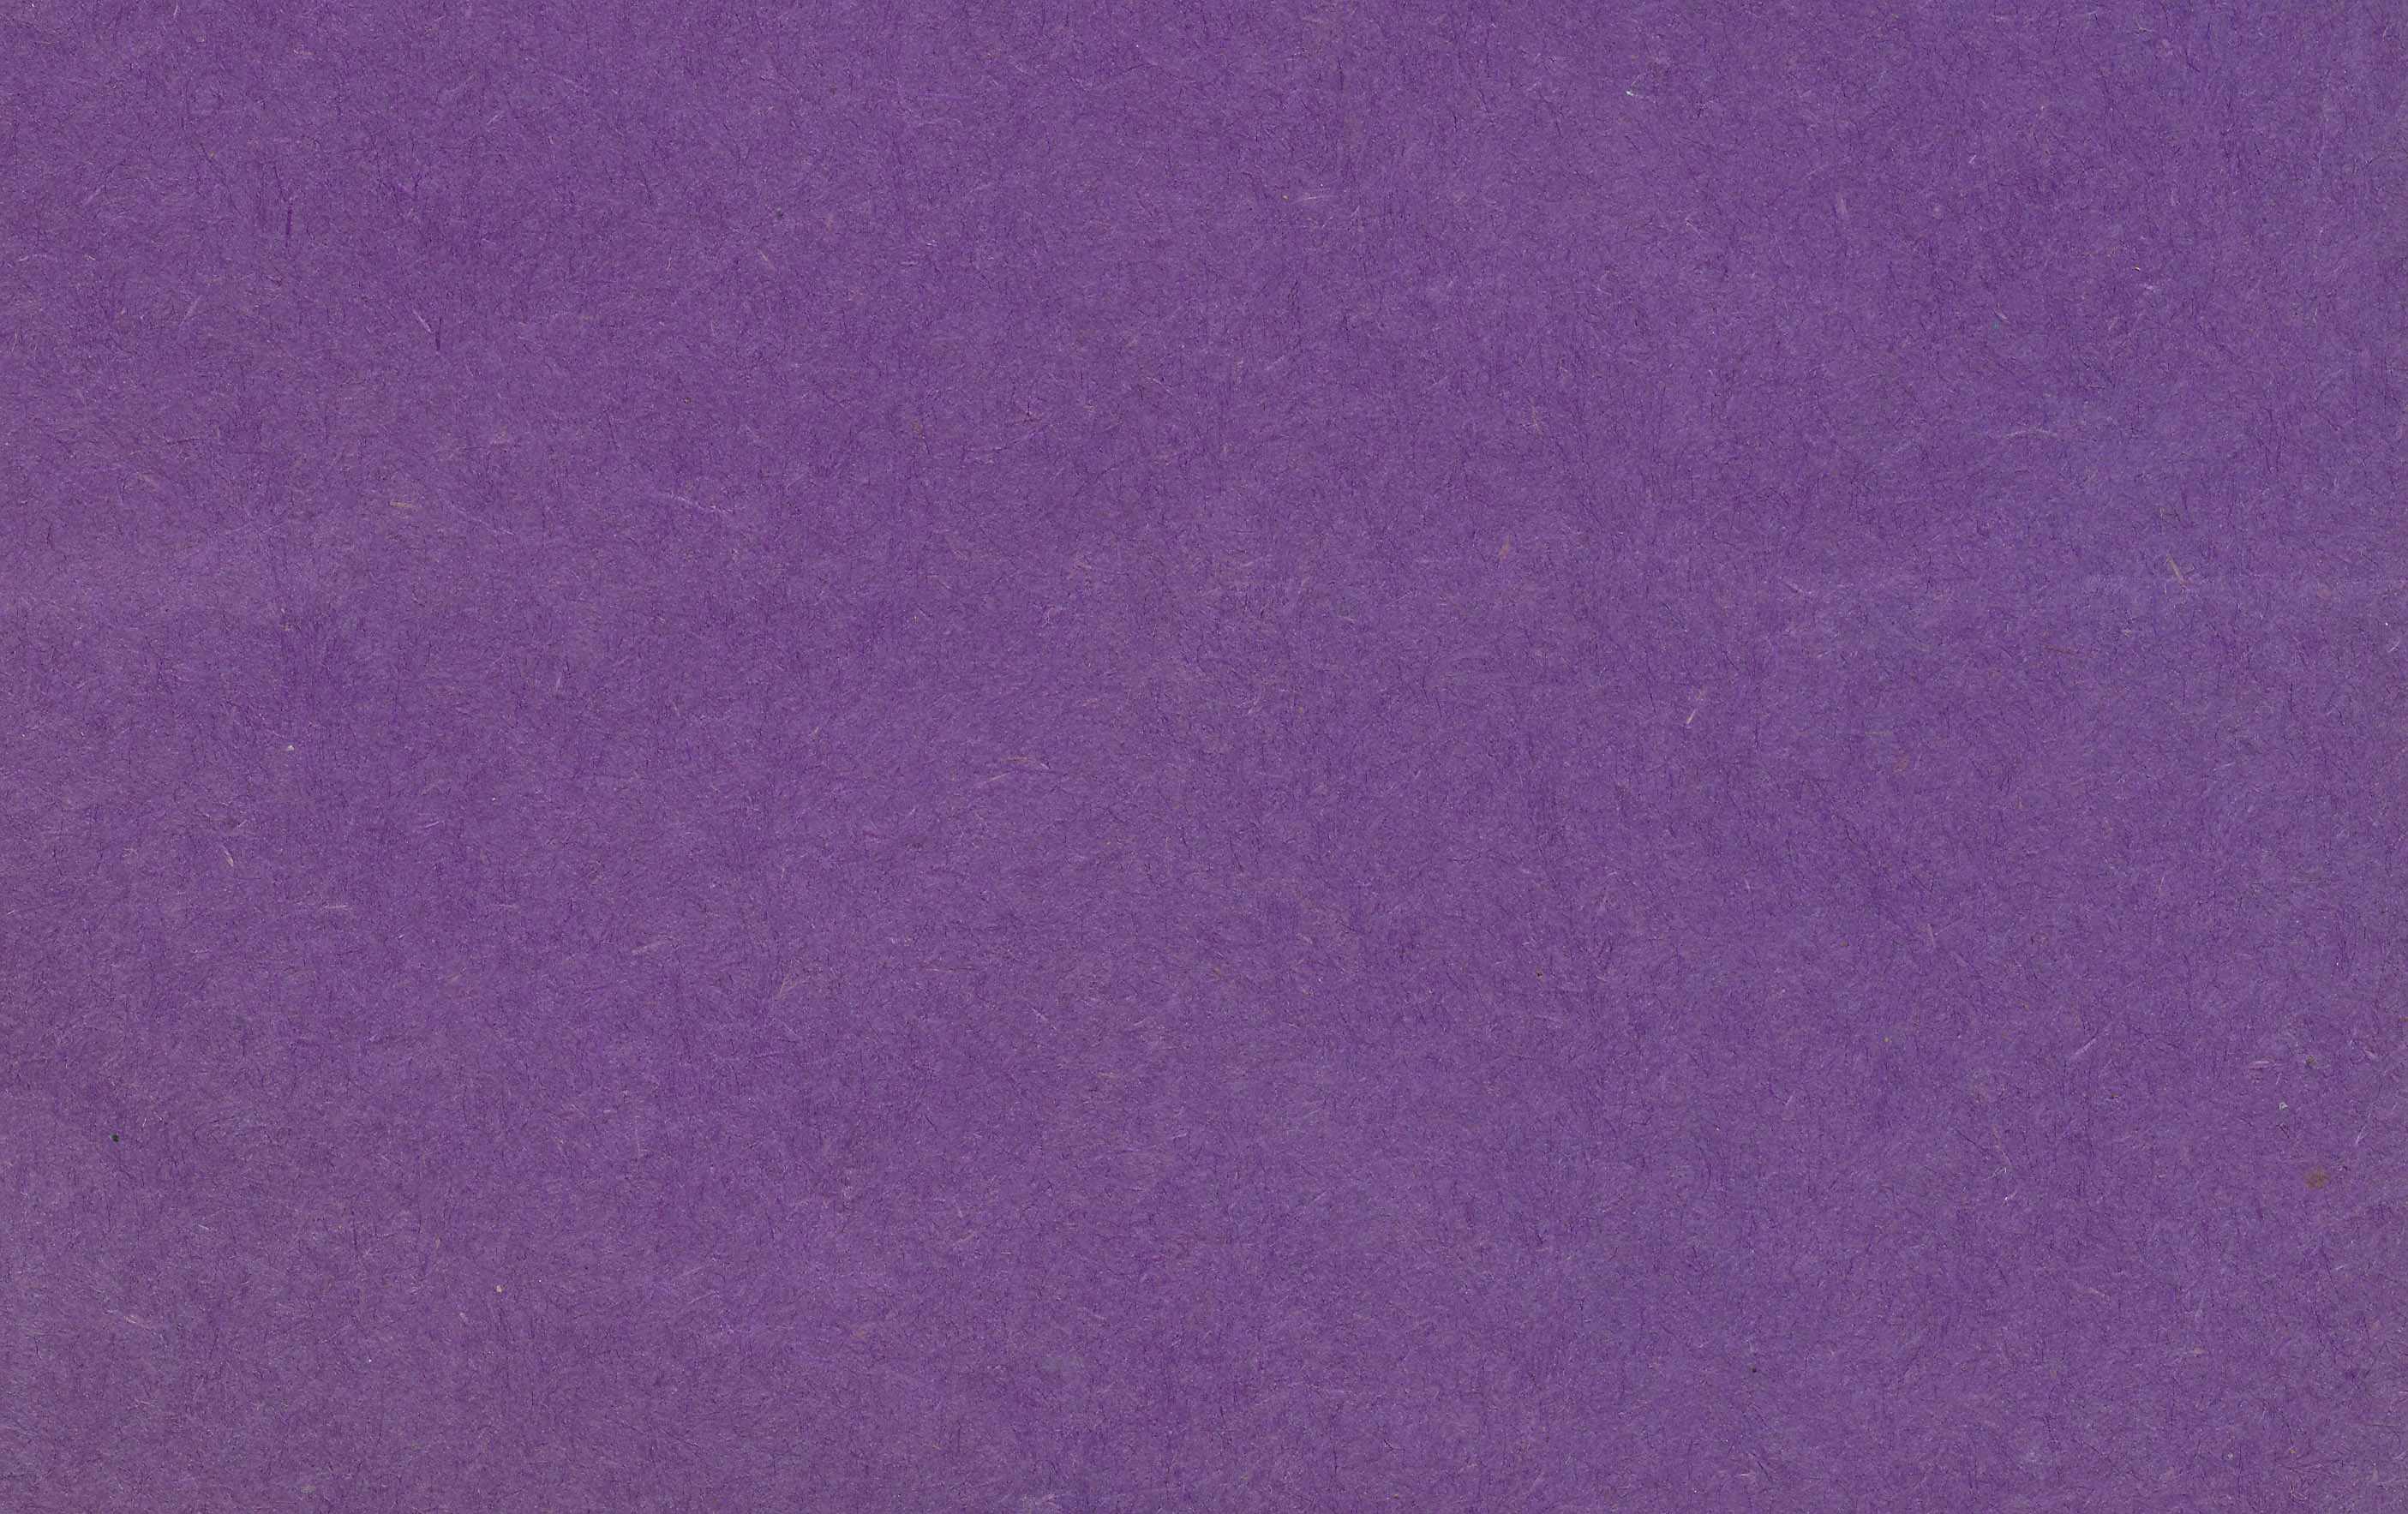 Purple | Textures for photoshop free